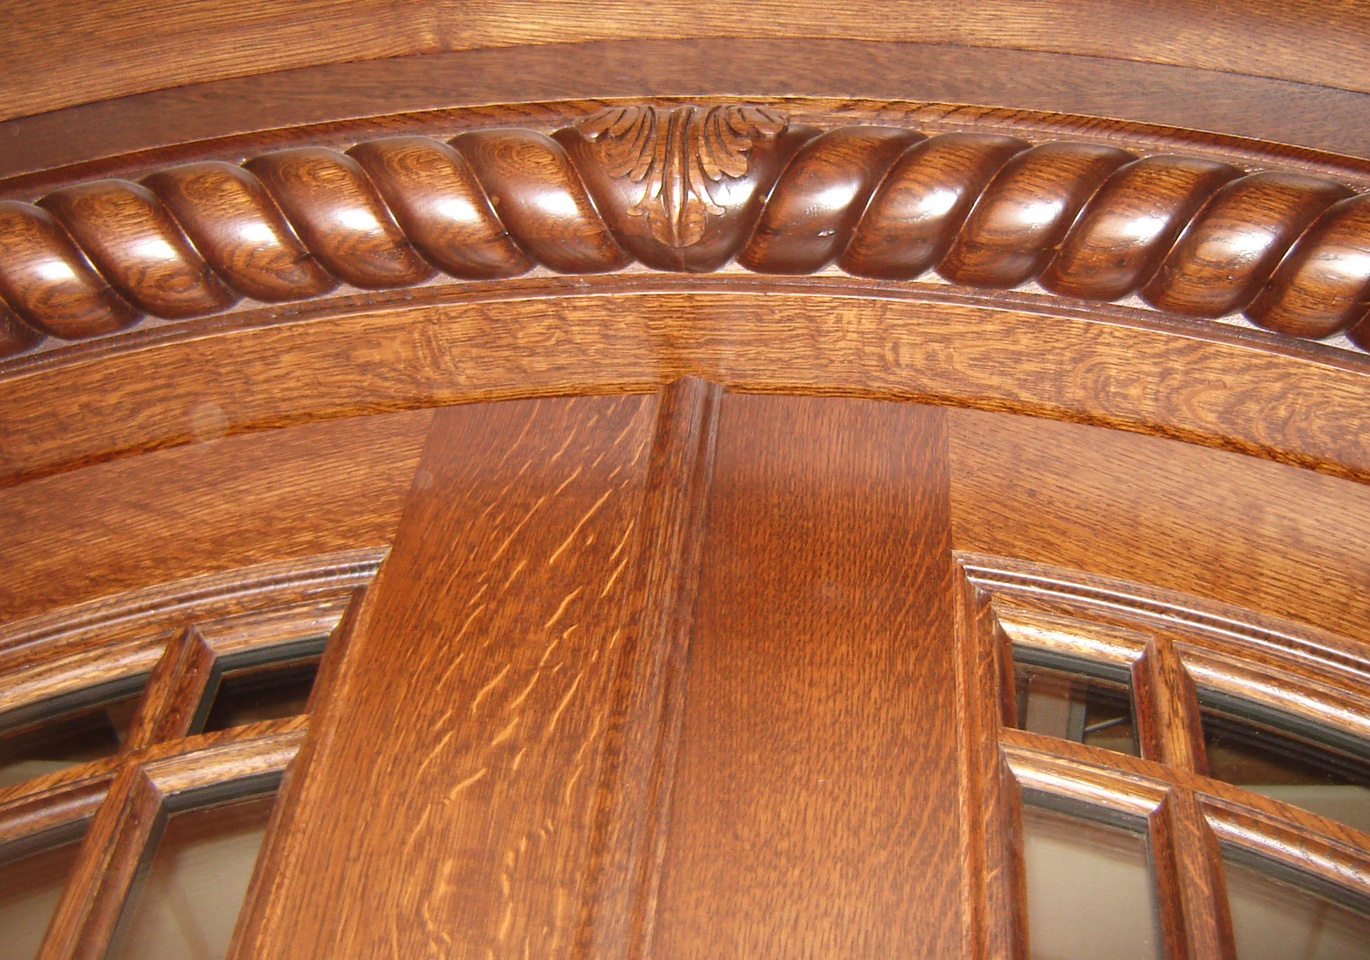 Architectural Millwork Image 10